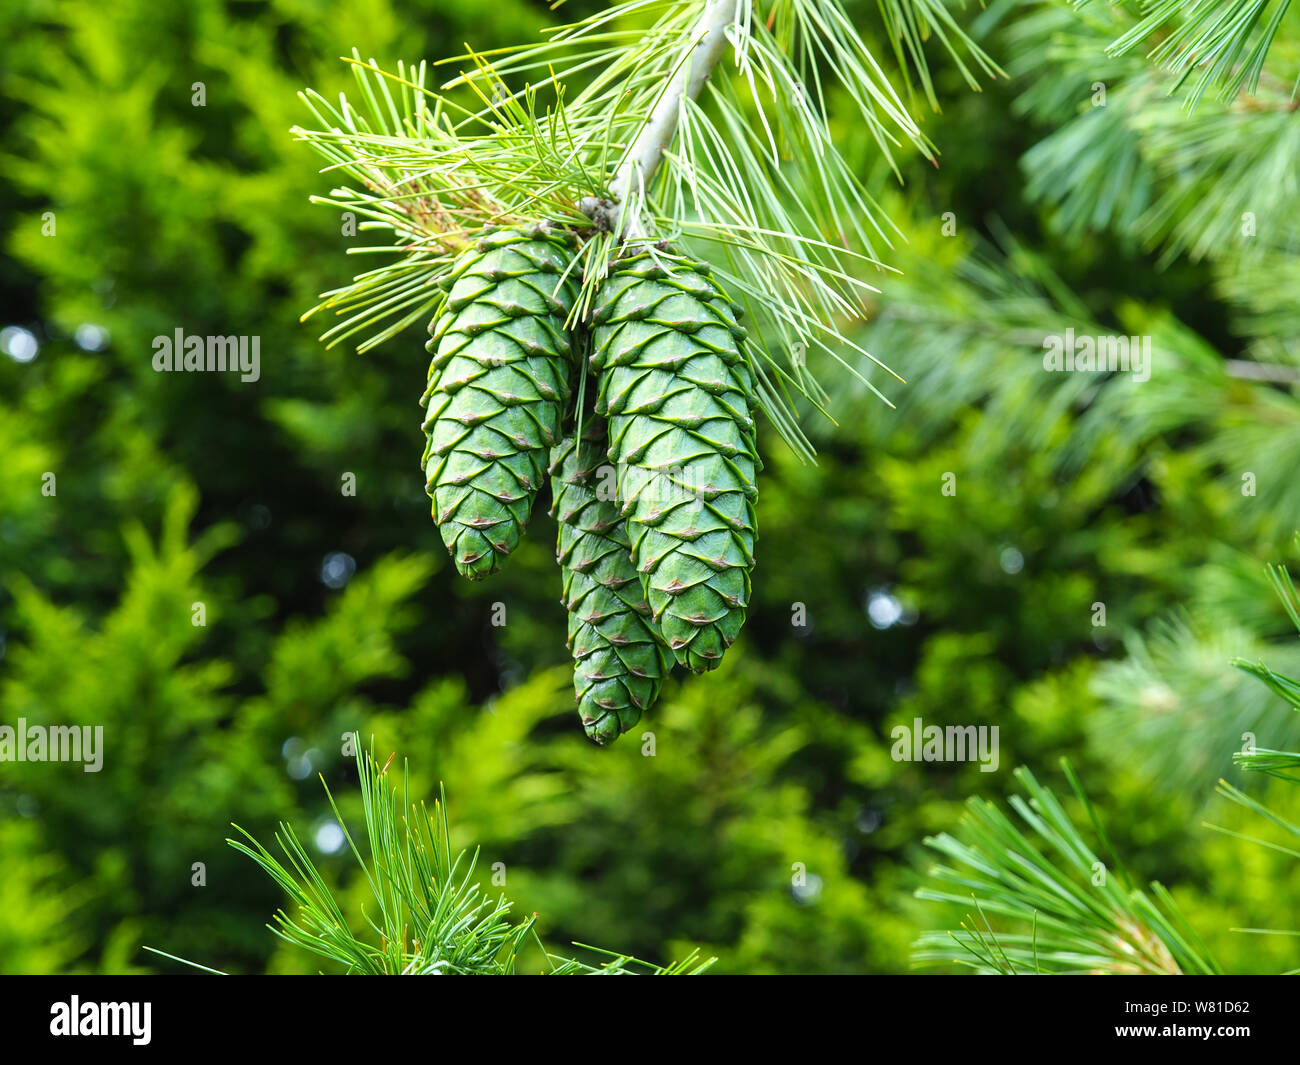 Impressive large green pine cones hanging on a tree branch Stock Photo